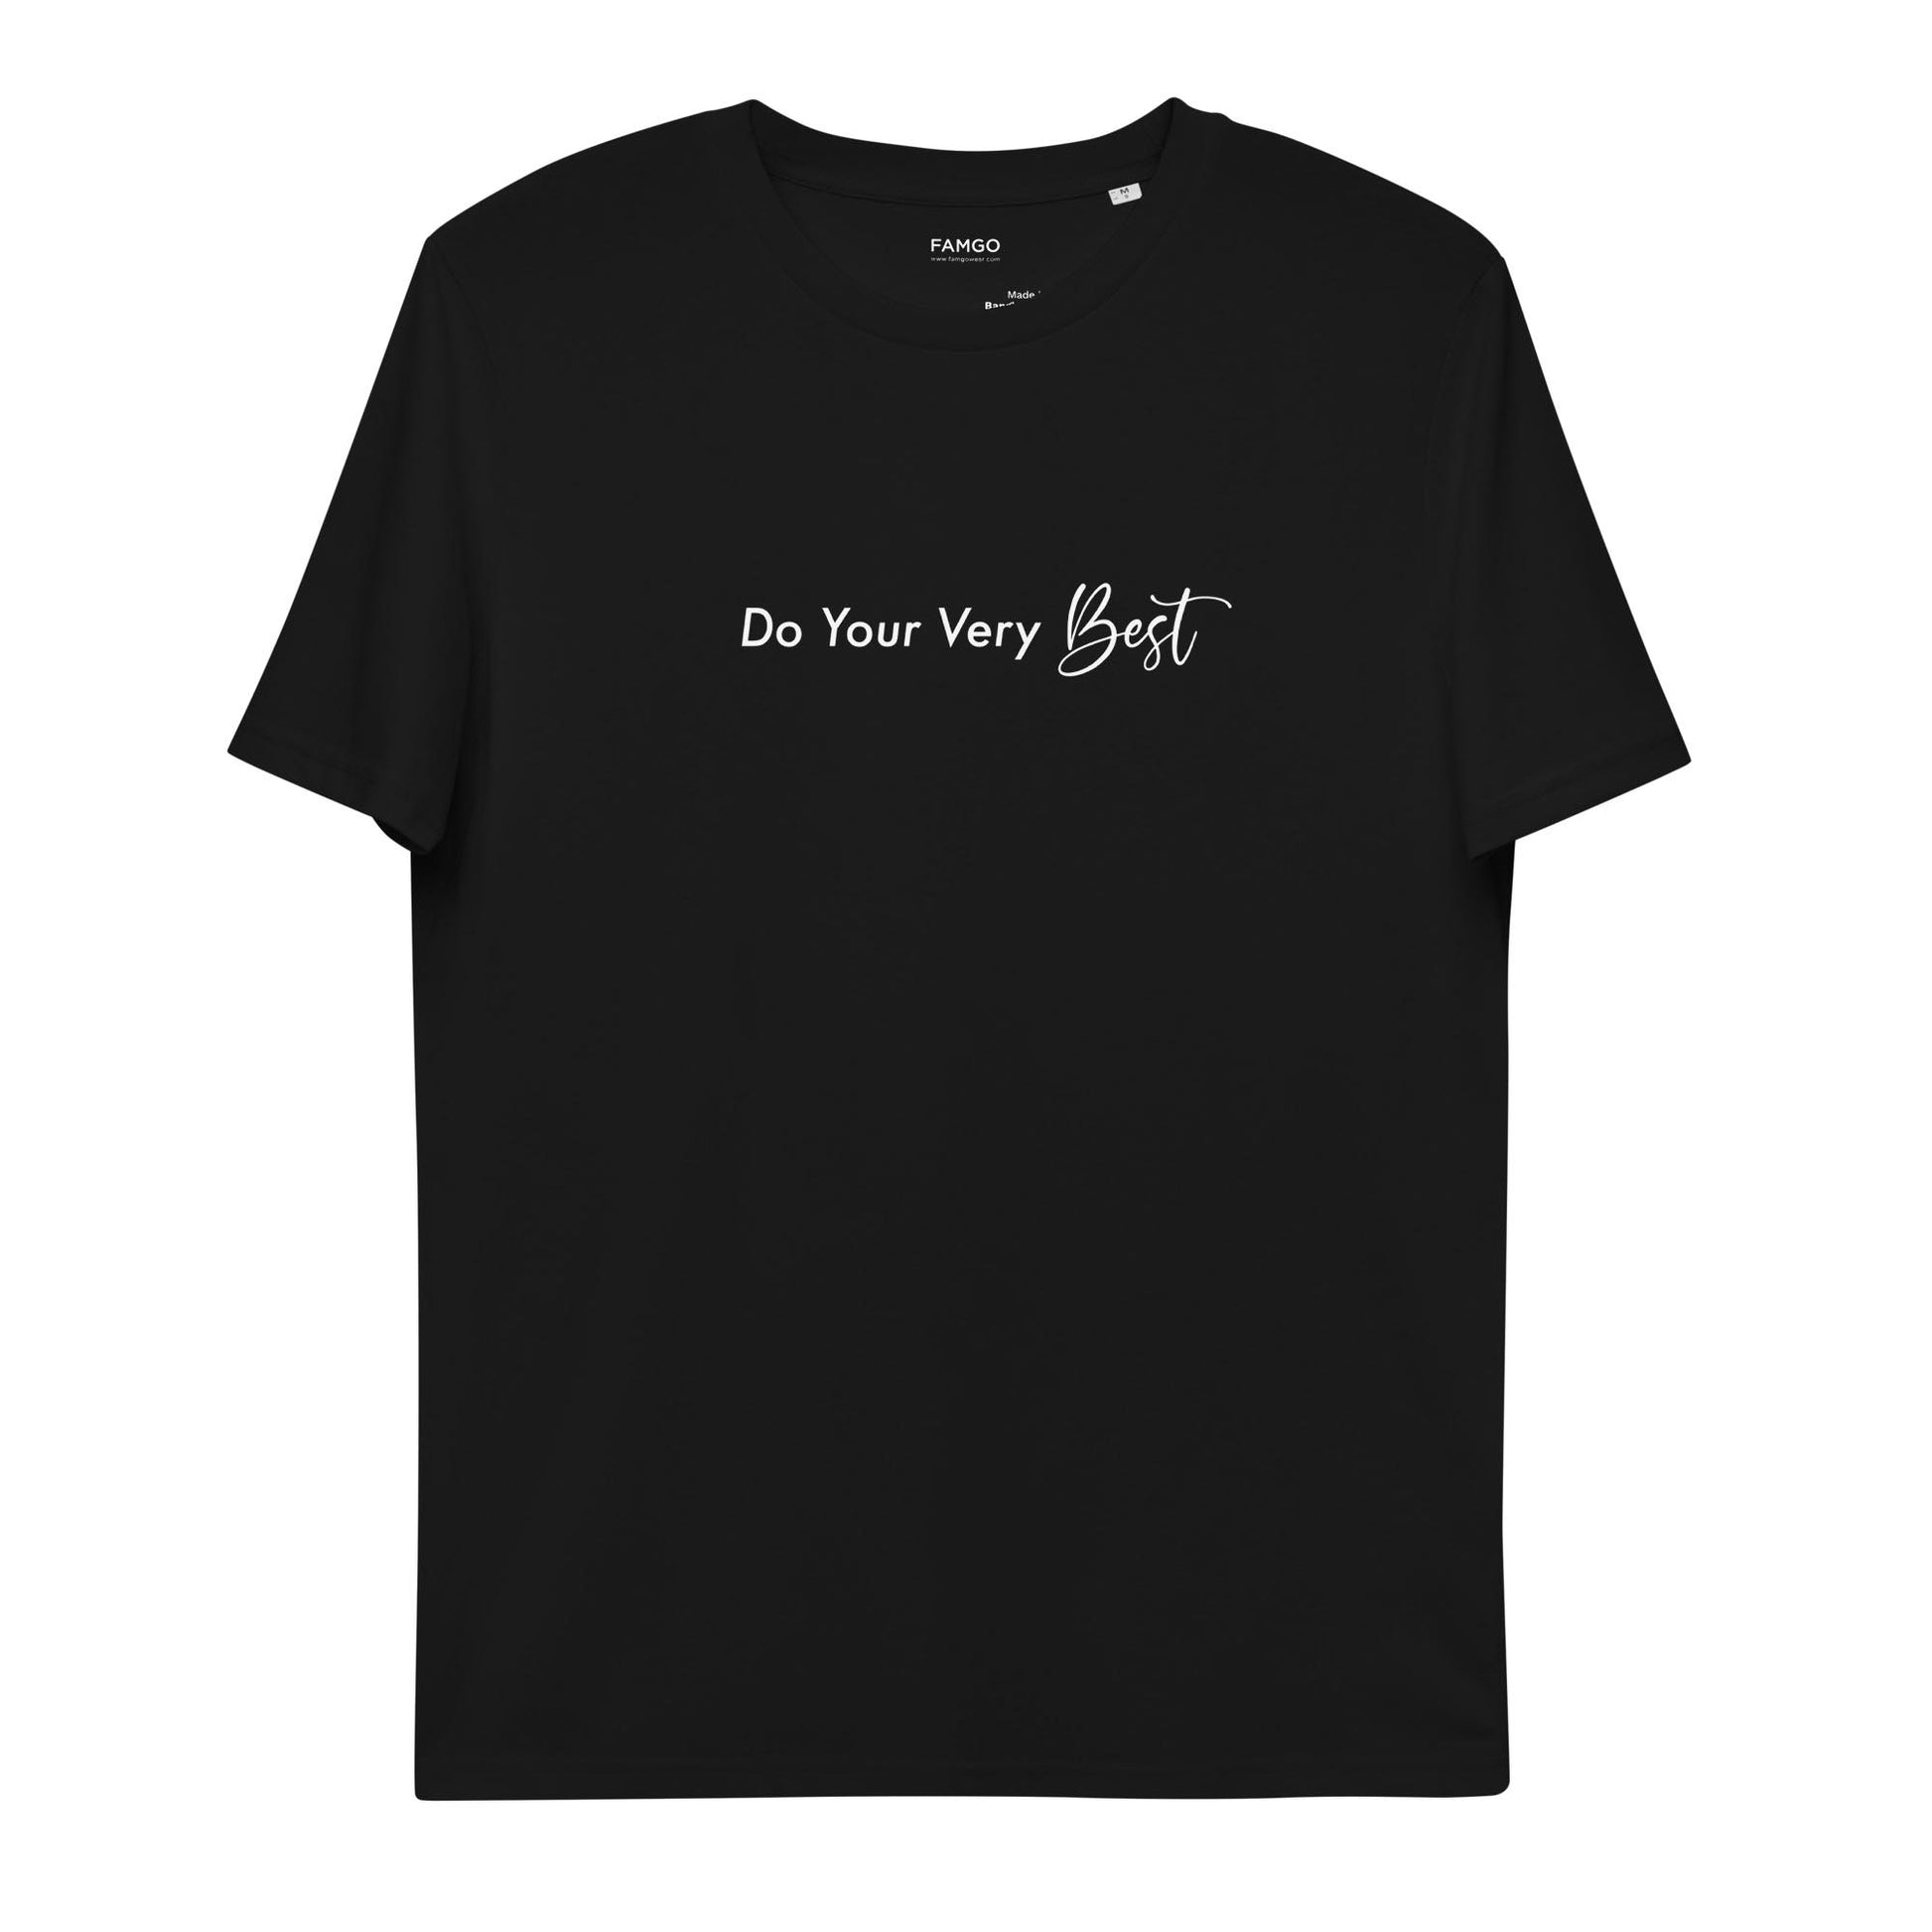 Women black motivational t-shirt with motivational quote, "Do Your Very Best."